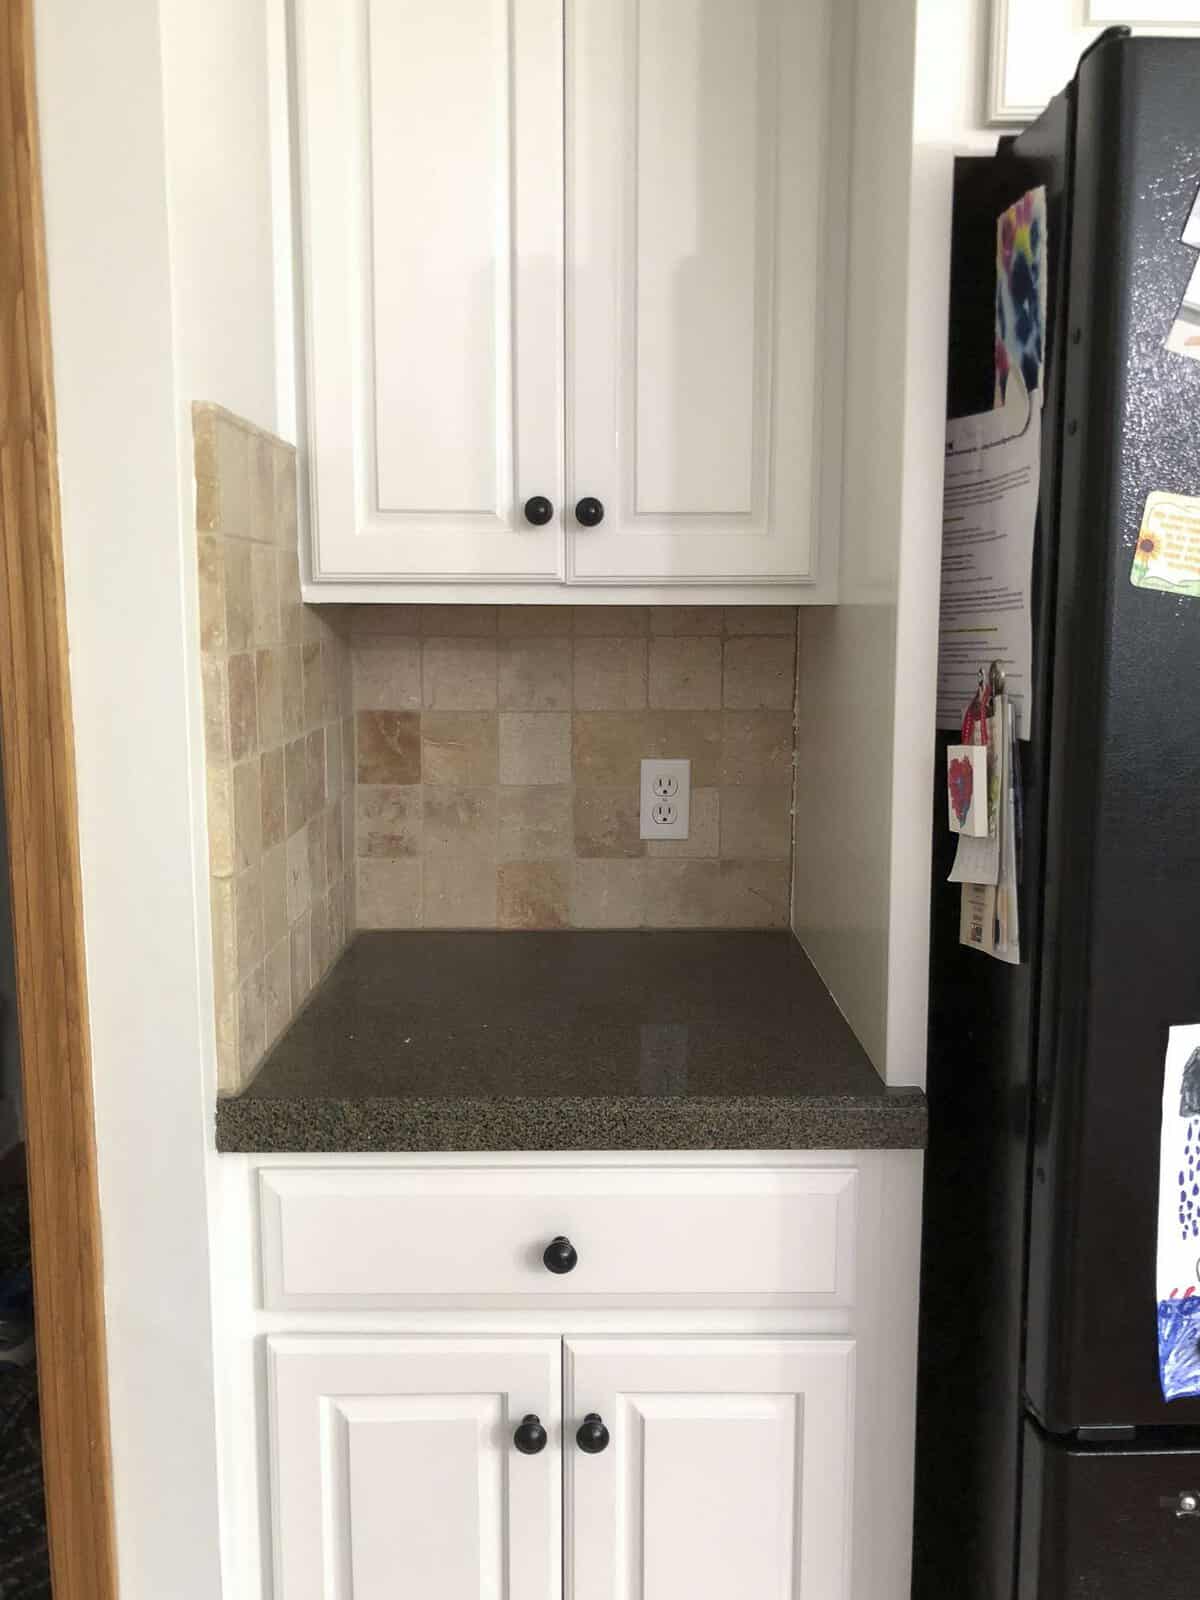 How To Paint A Tile Backsplash Kitchen Renovation Grace In My Space